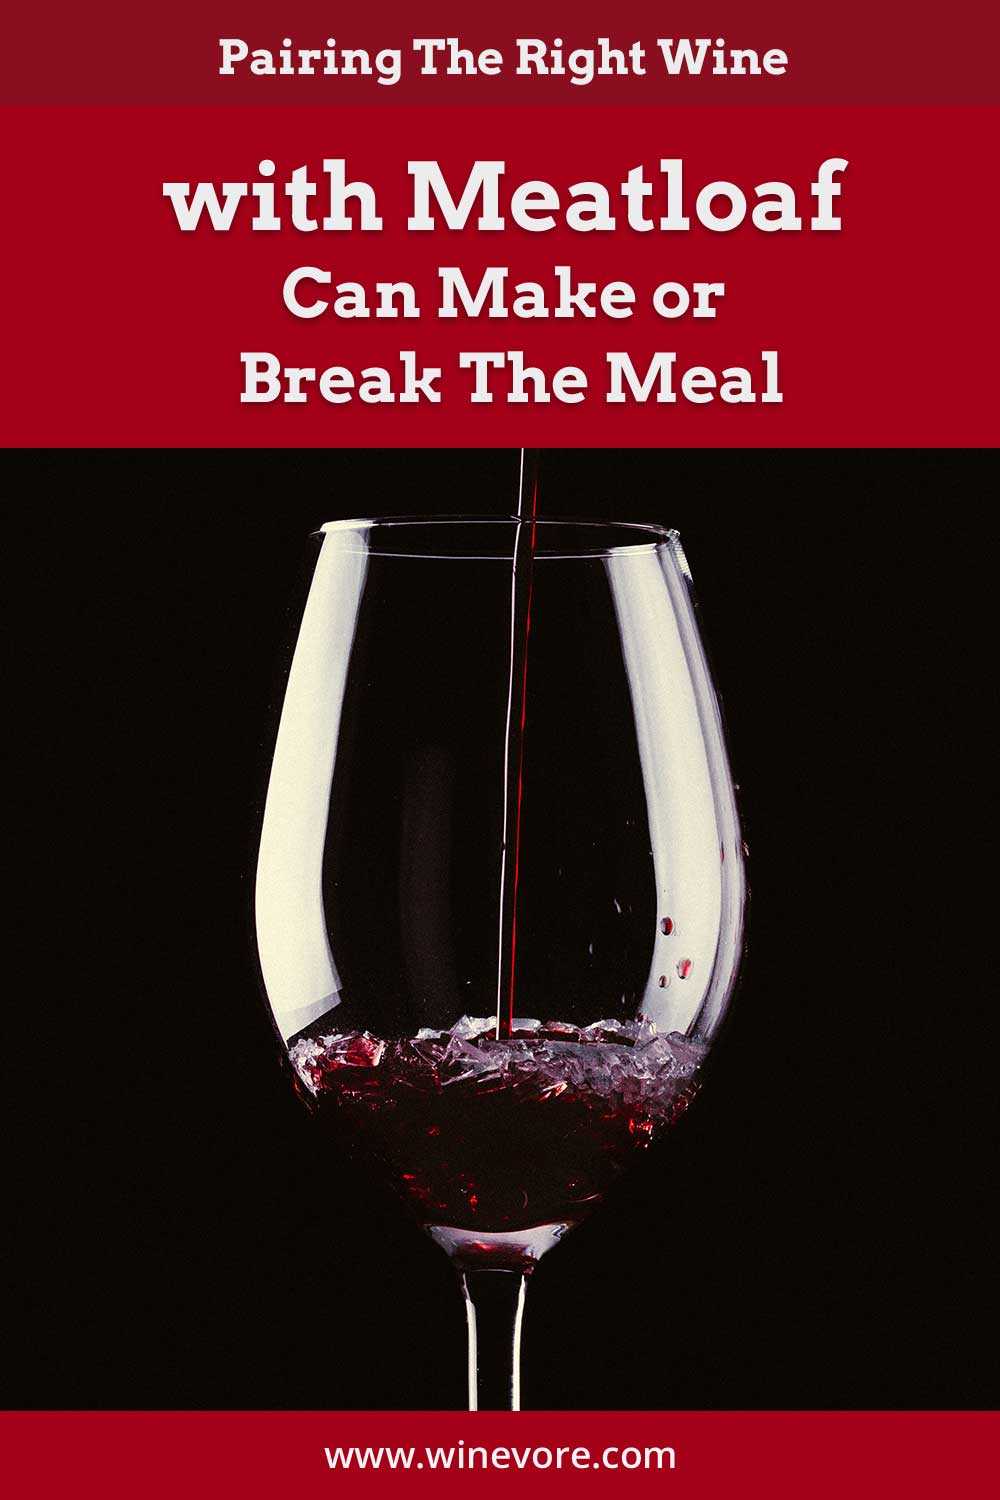 Red wine pouring into a wine glass in front of a black background - Pairing The Right Wine with Meatloaf.